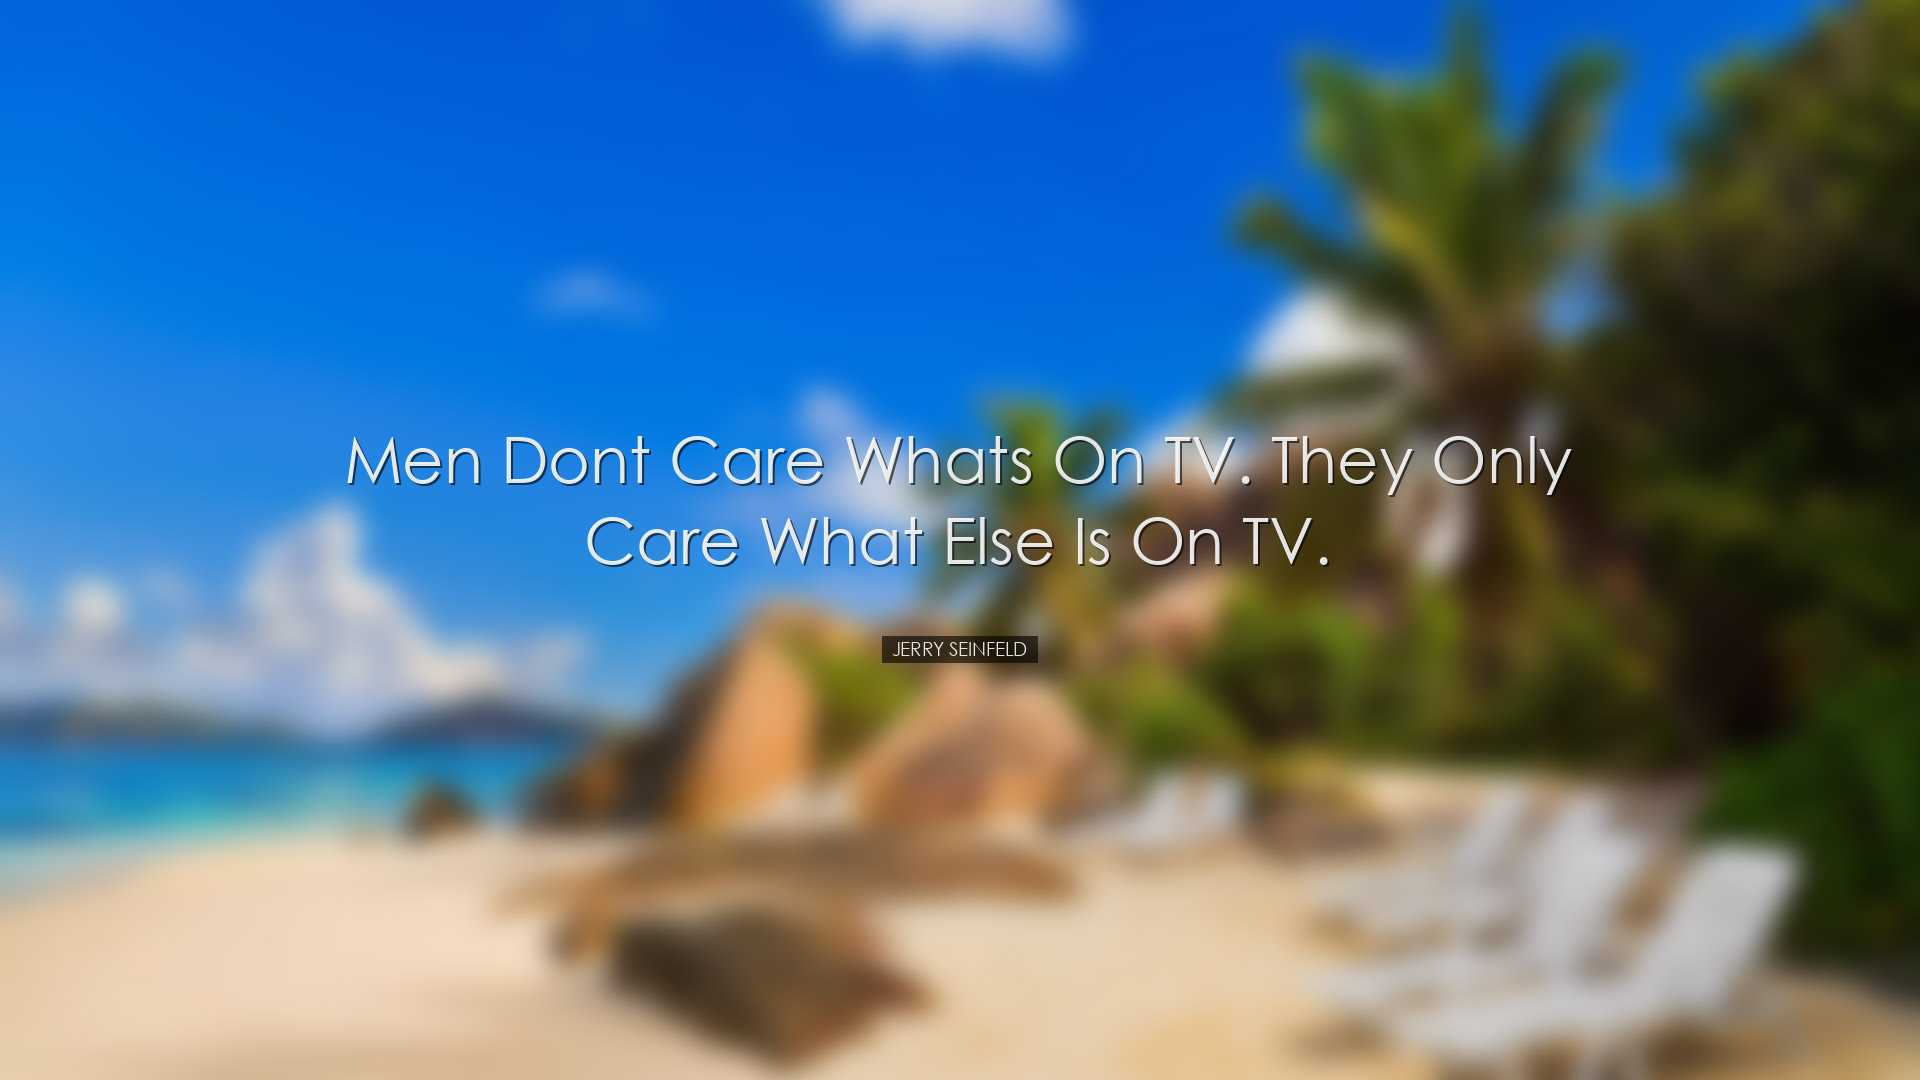 Men dont care whats on TV. They only care what else is on TV. - Je